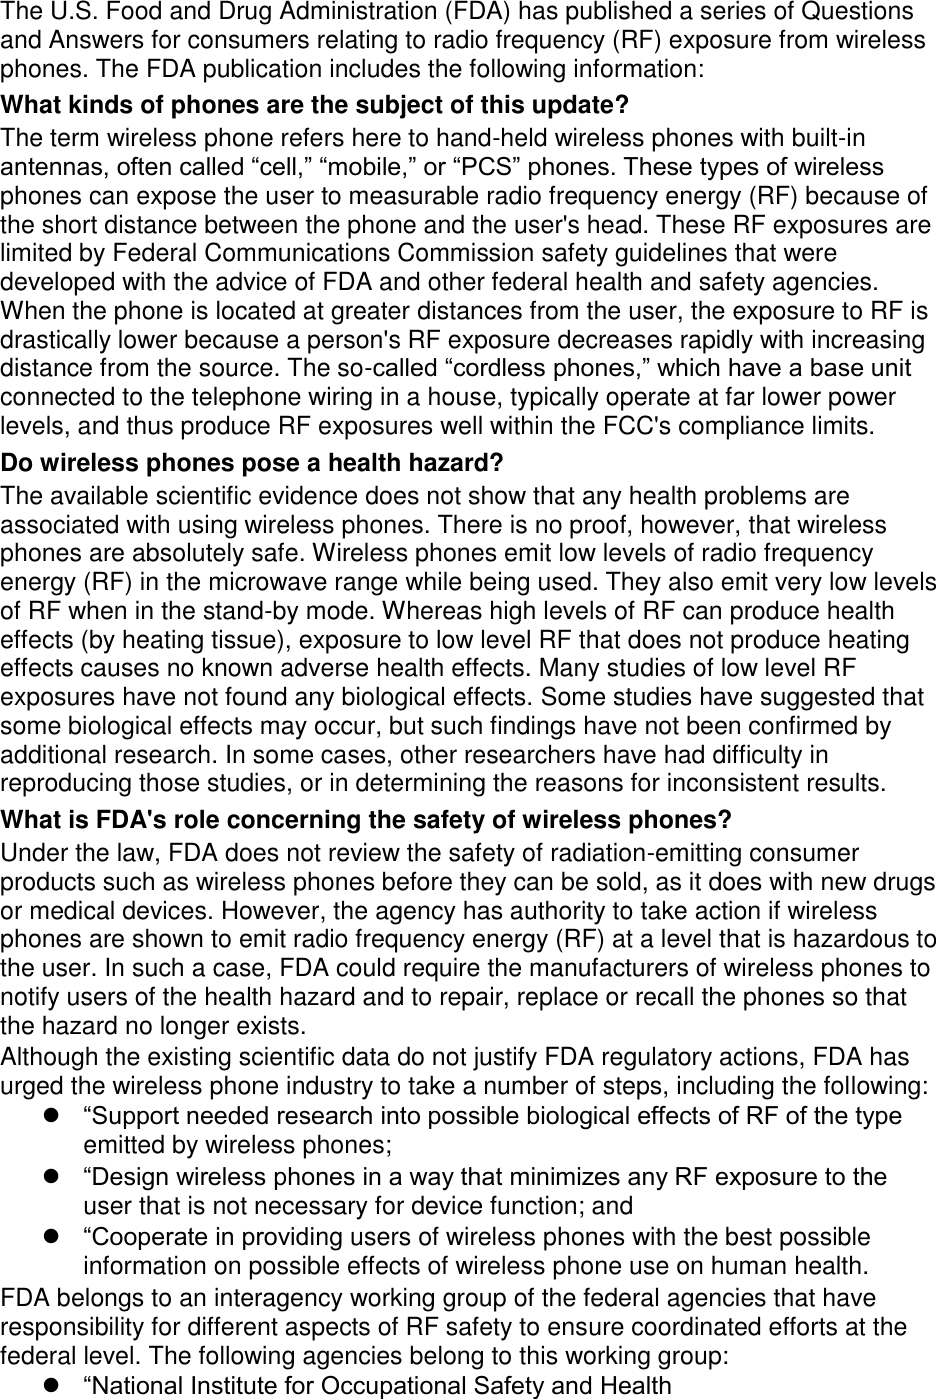 The U.S. Food and Drug Administration (FDA) has published a series of Questions and Answers for consumers relating to radio frequency (RF) exposure from wireless phones. The FDA publication includes the following information: What kinds of phones are the subject of this update? The term wireless phone refers here to hand-held wireless phones with built-in antennas, often called “cell,” “mobile,” or “PCS” phones. These types of wireless phones can expose the user to measurable radio frequency energy (RF) because of the short distance between the phone and the user&apos;s head. These RF exposures are limited by Federal Communications Commission safety guidelines that were developed with the advice of FDA and other federal health and safety agencies. When the phone is located at greater distances from the user, the exposure to RF is drastically lower because a person&apos;s RF exposure decreases rapidly with increasing distance from the source. The so-called “cordless phones,” which have a base unit connected to the telephone wiring in a house, typically operate at far lower power levels, and thus produce RF exposures well within the FCC&apos;s compliance limits. Do wireless phones pose a health hazard? The available scientific evidence does not show that any health problems are associated with using wireless phones. There is no proof, however, that wireless phones are absolutely safe. Wireless phones emit low levels of radio frequency energy (RF) in the microwave range while being used. They also emit very low levels of RF when in the stand-by mode. Whereas high levels of RF can produce health effects (by heating tissue), exposure to low level RF that does not produce heating effects causes no known adverse health effects. Many studies of low level RF exposures have not found any biological effects. Some studies have suggested that some biological effects may occur, but such findings have not been confirmed by additional research. In some cases, other researchers have had difficulty in reproducing those studies, or in determining the reasons for inconsistent results. What is FDA&apos;s role concerning the safety of wireless phones? Under the law, FDA does not review the safety of radiation-emitting consumer products such as wireless phones before they can be sold, as it does with new drugs or medical devices. However, the agency has authority to take action if wireless phones are shown to emit radio frequency energy (RF) at a level that is hazardous to the user. In such a case, FDA could require the manufacturers of wireless phones to notify users of the health hazard and to repair, replace or recall the phones so that the hazard no longer exists. Although the existing scientific data do not justify FDA regulatory actions, FDA has urged the wireless phone industry to take a number of steps, including the following:  “Support needed research into possible biological effects of RF of the type emitted by wireless phones;  “Design wireless phones in a way that minimizes any RF exposure to the user that is not necessary for device function; and  “Cooperate in providing users of wireless phones with the best possible information on possible effects of wireless phone use on human health. FDA belongs to an interagency working group of the federal agencies that have responsibility for different aspects of RF safety to ensure coordinated efforts at the federal level. The following agencies belong to this working group:  “National Institute for Occupational Safety and Health 